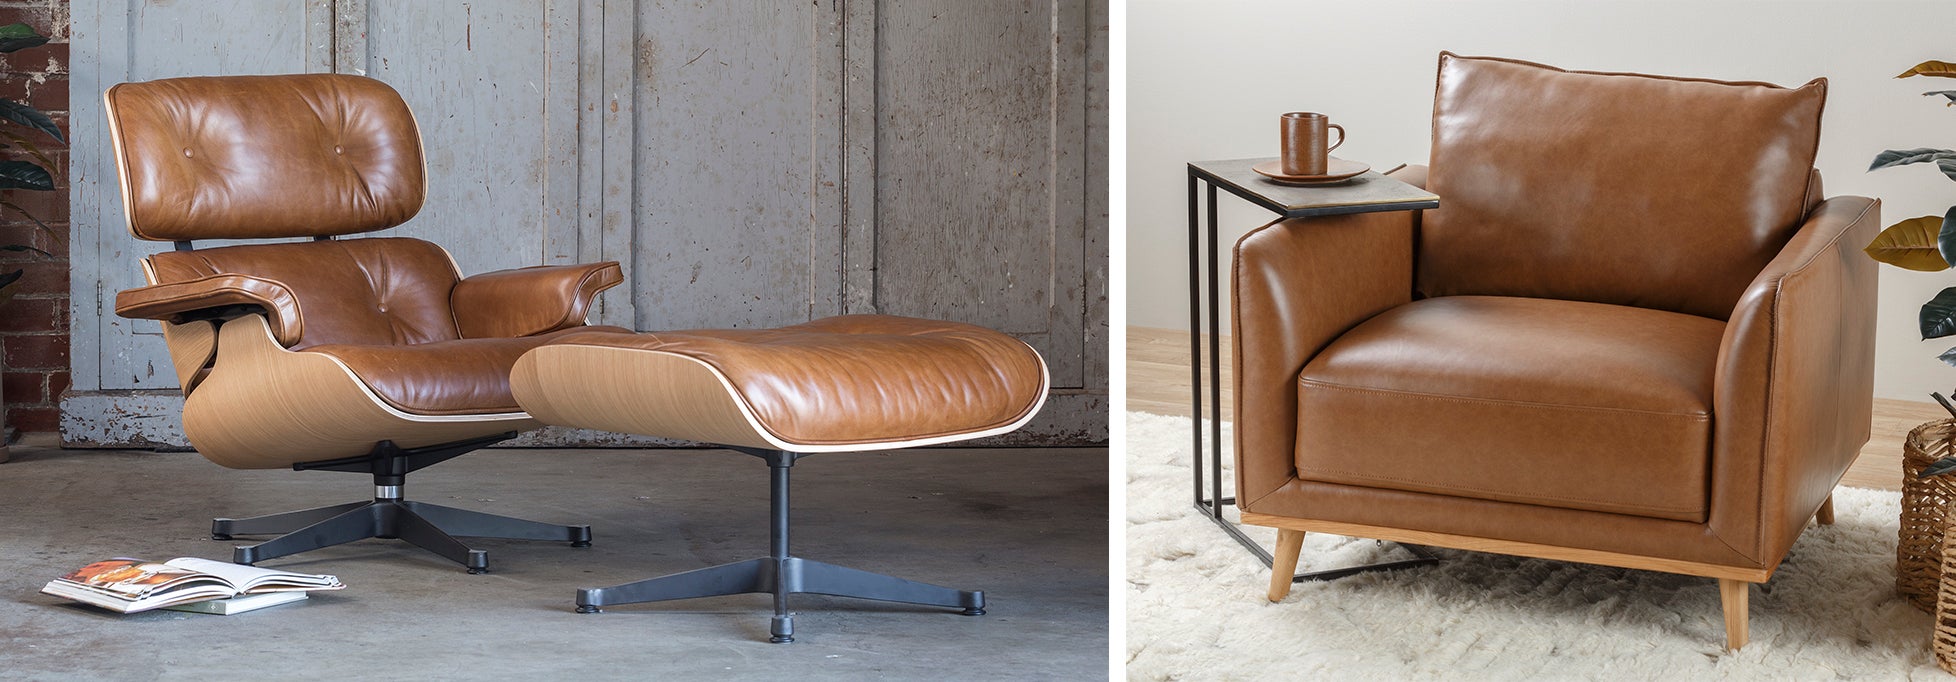 Leather Furniture - what you need to know